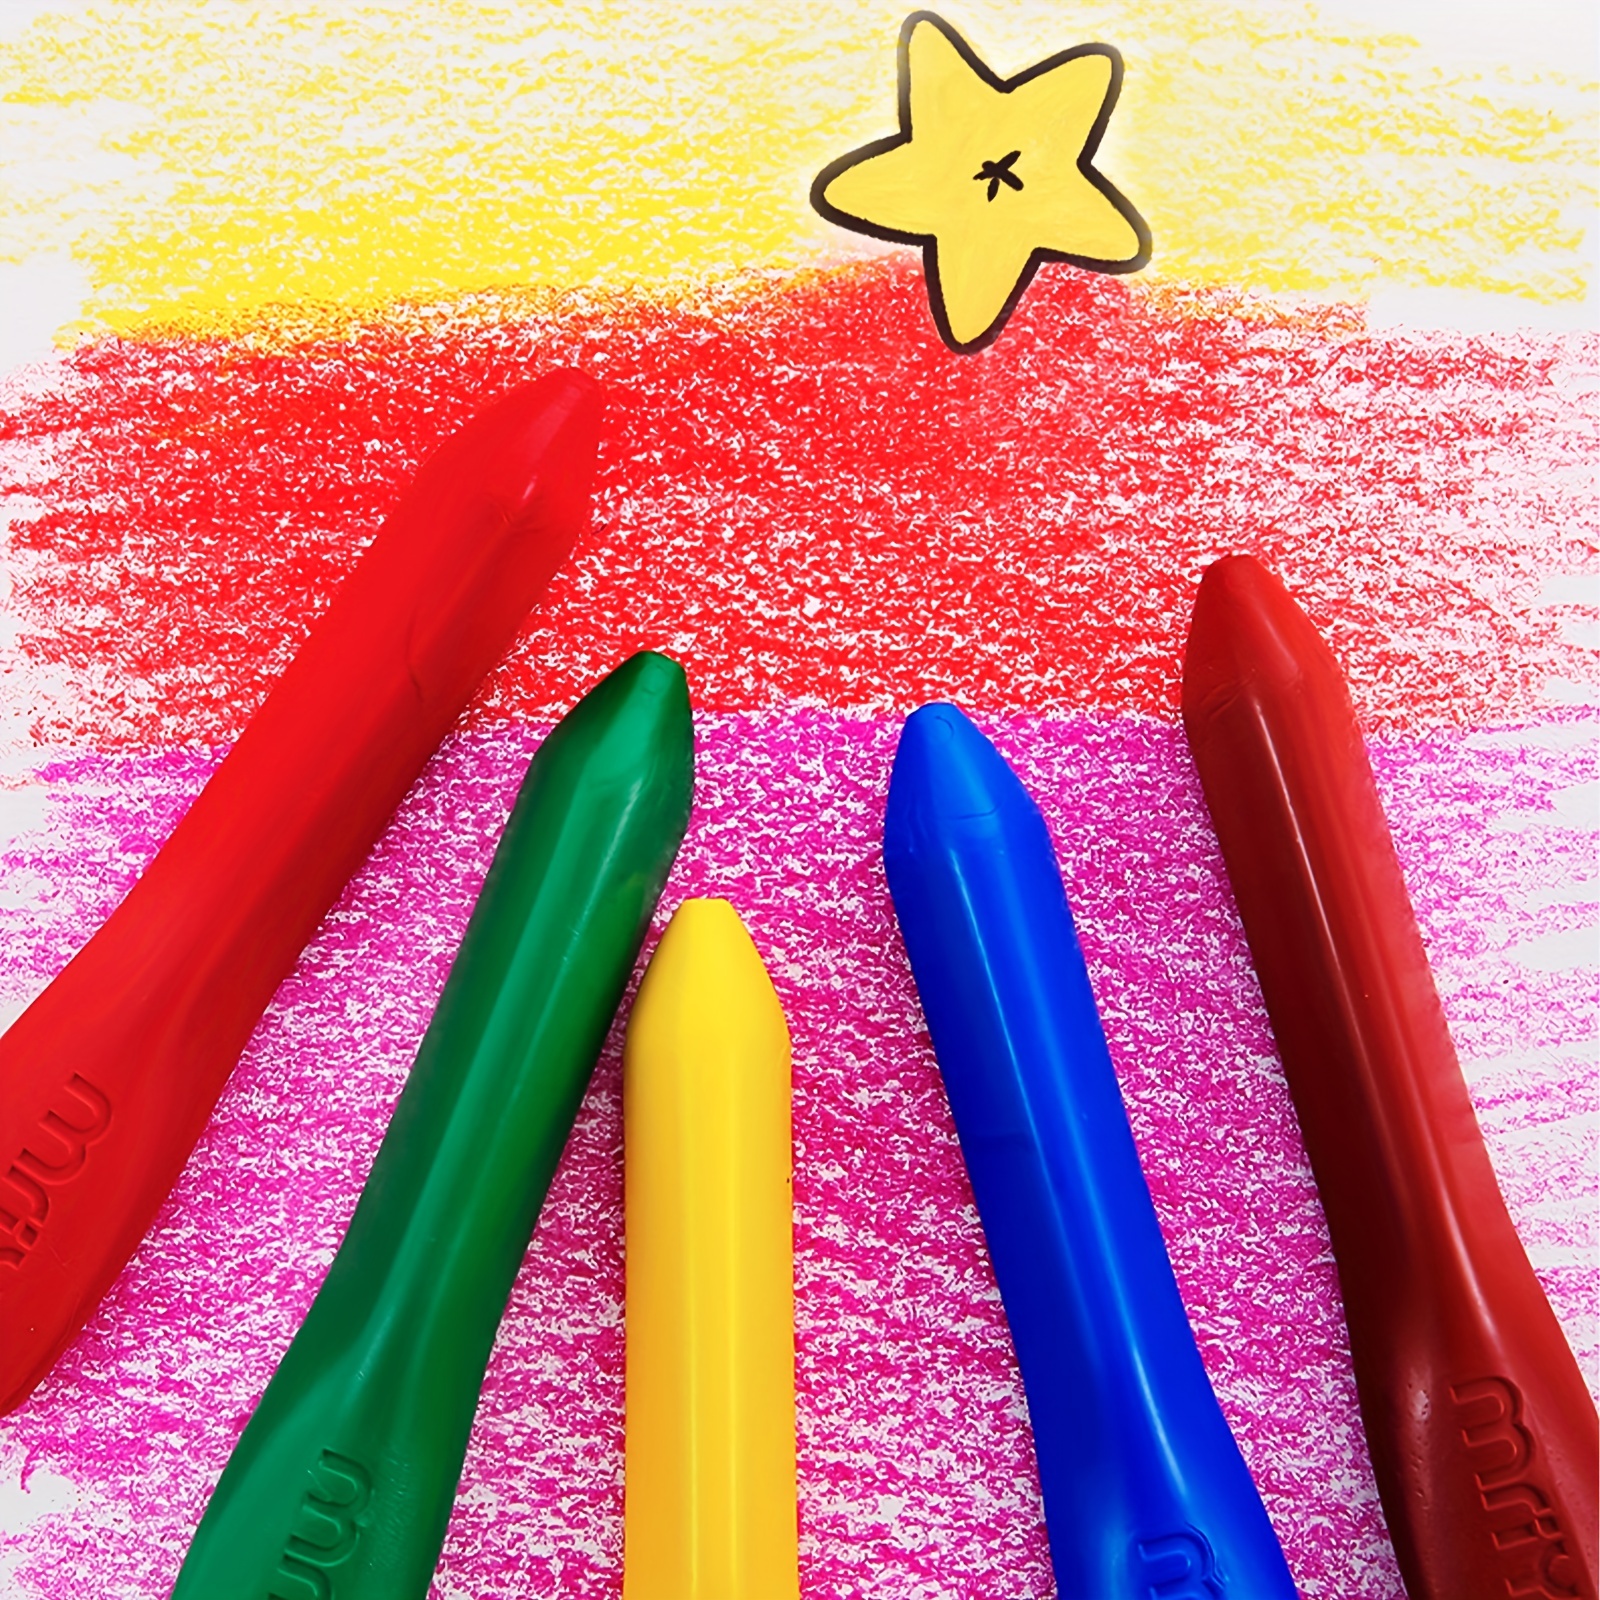 Anhui Sunshine Stationery Co., Ltd - Product Categories - Writing  Instruments - Wooden/Plastic Color Pencil